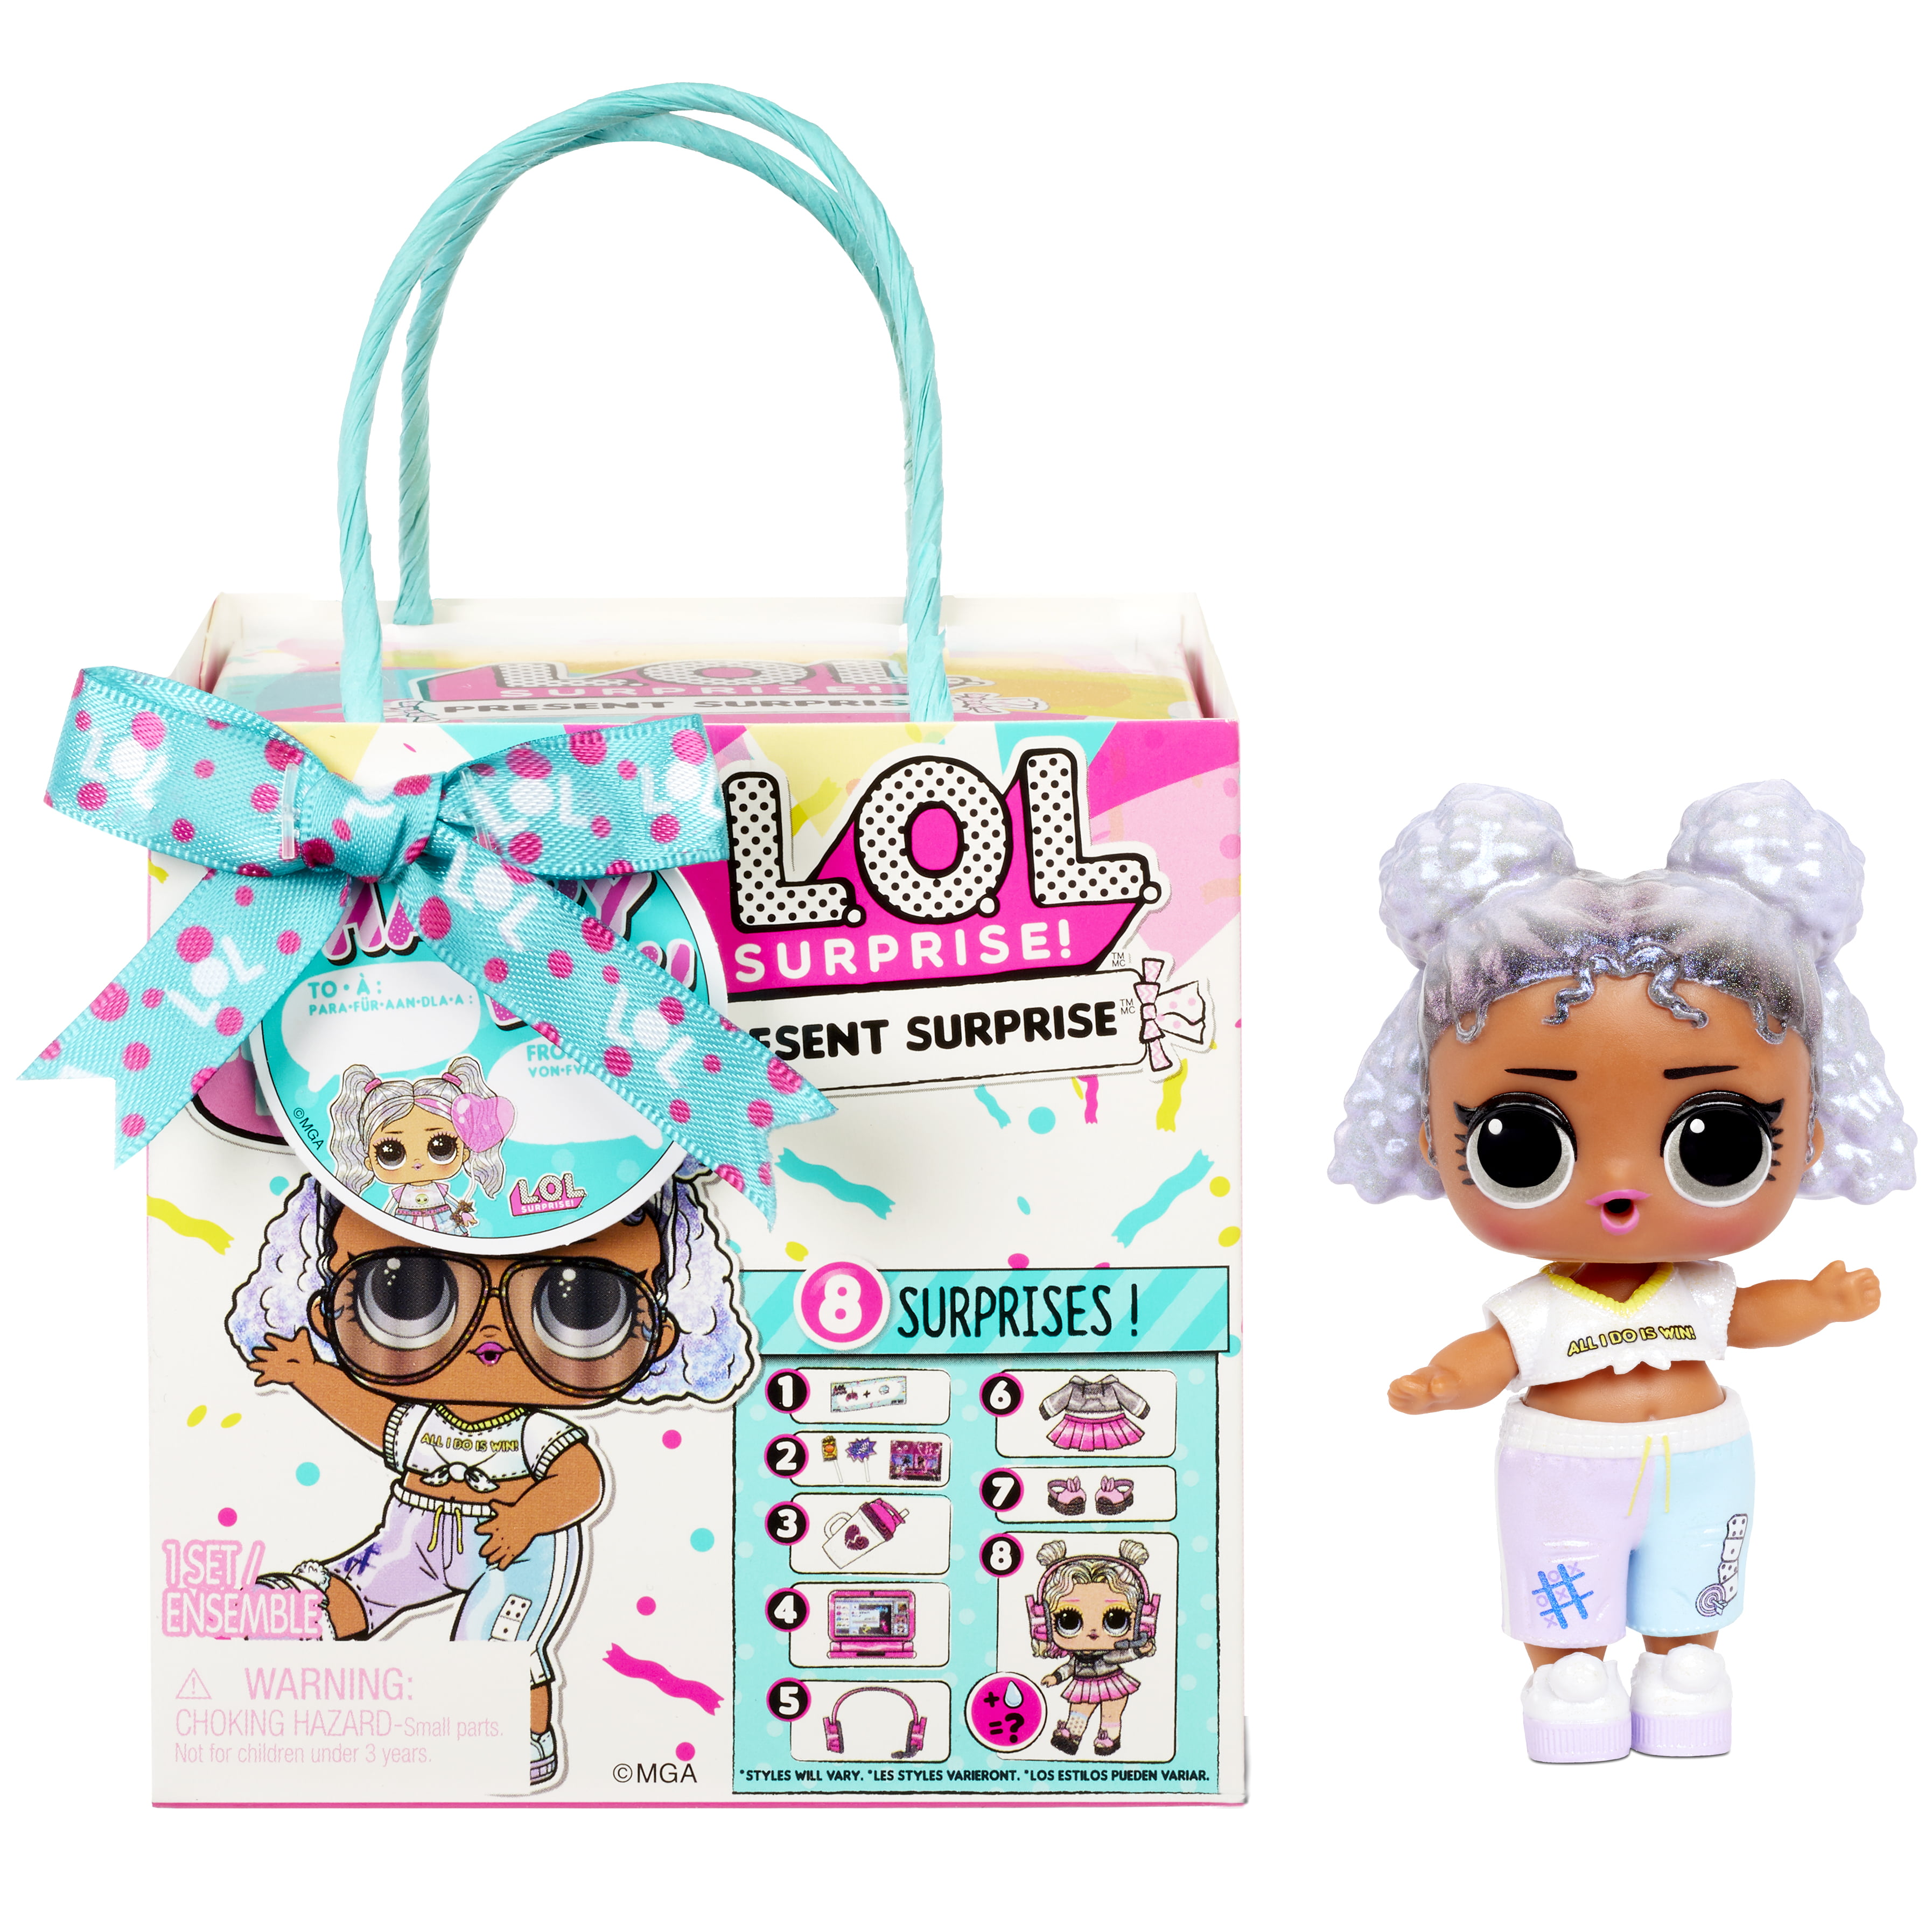 LOL Surprise Light box Boy and girl Vinyl collection Xmas gift series 38 